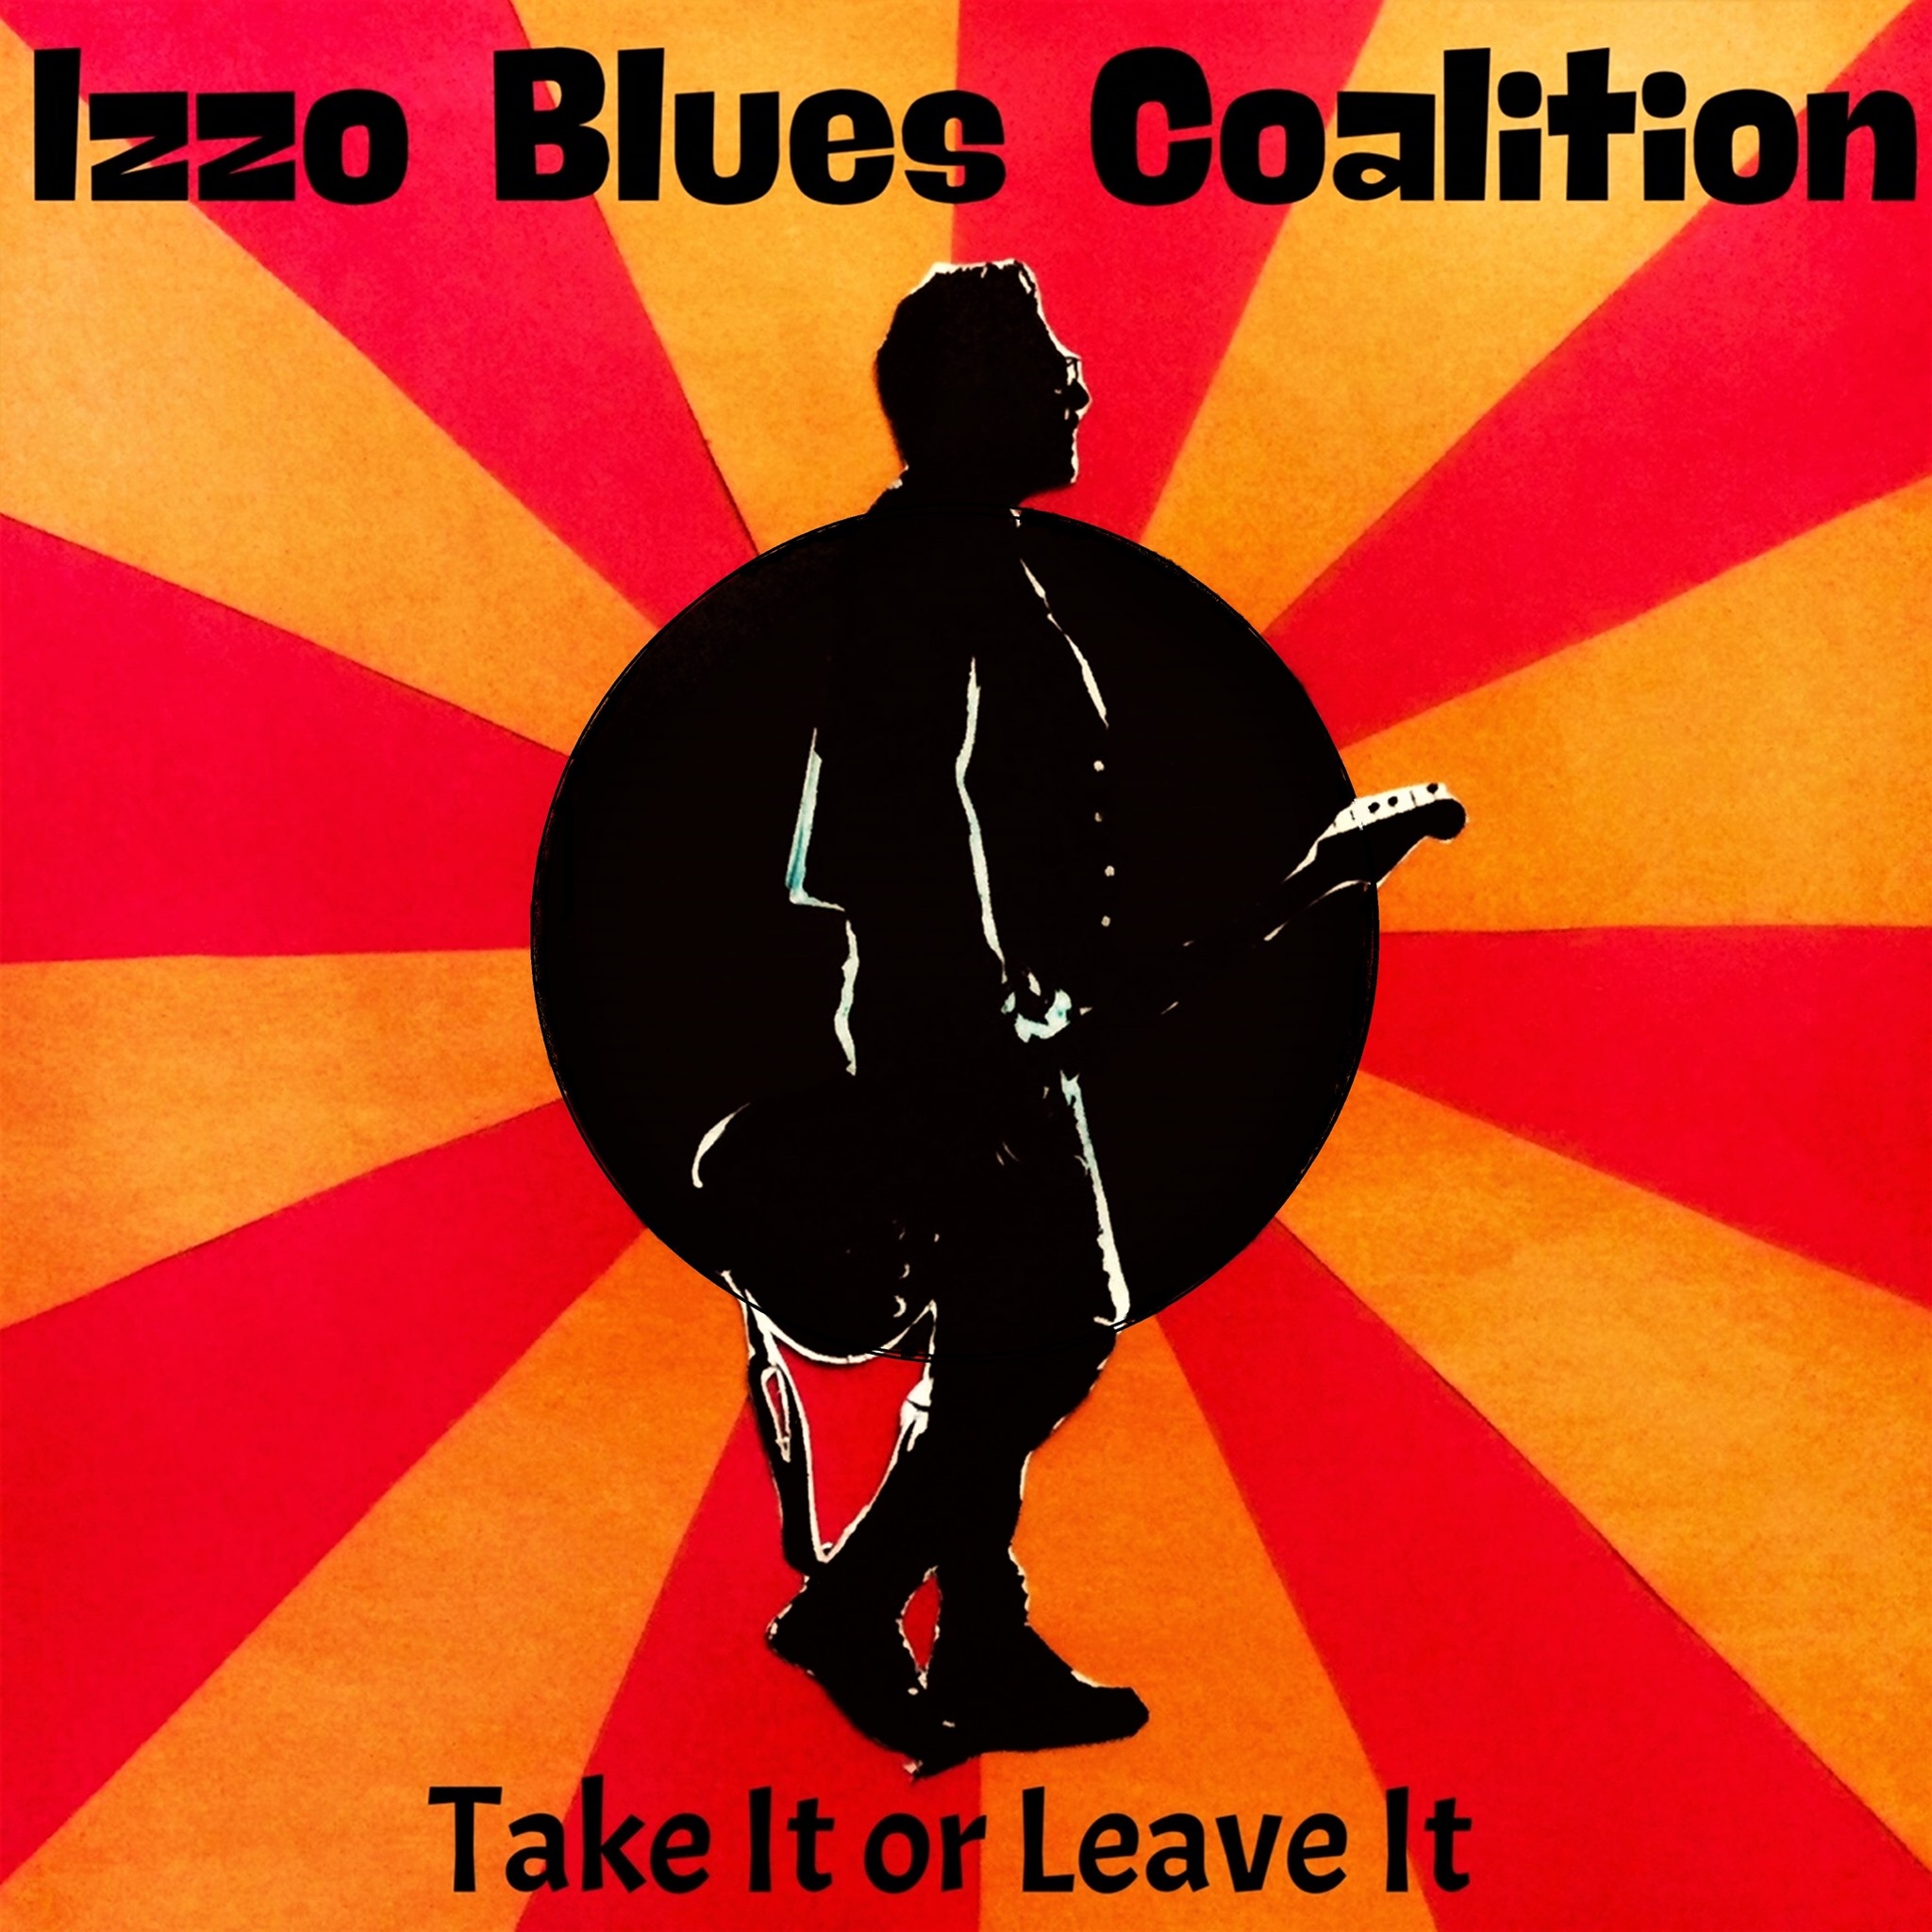 Montreal's IZZO BLUES COALITION Say “Take It or Leave It”